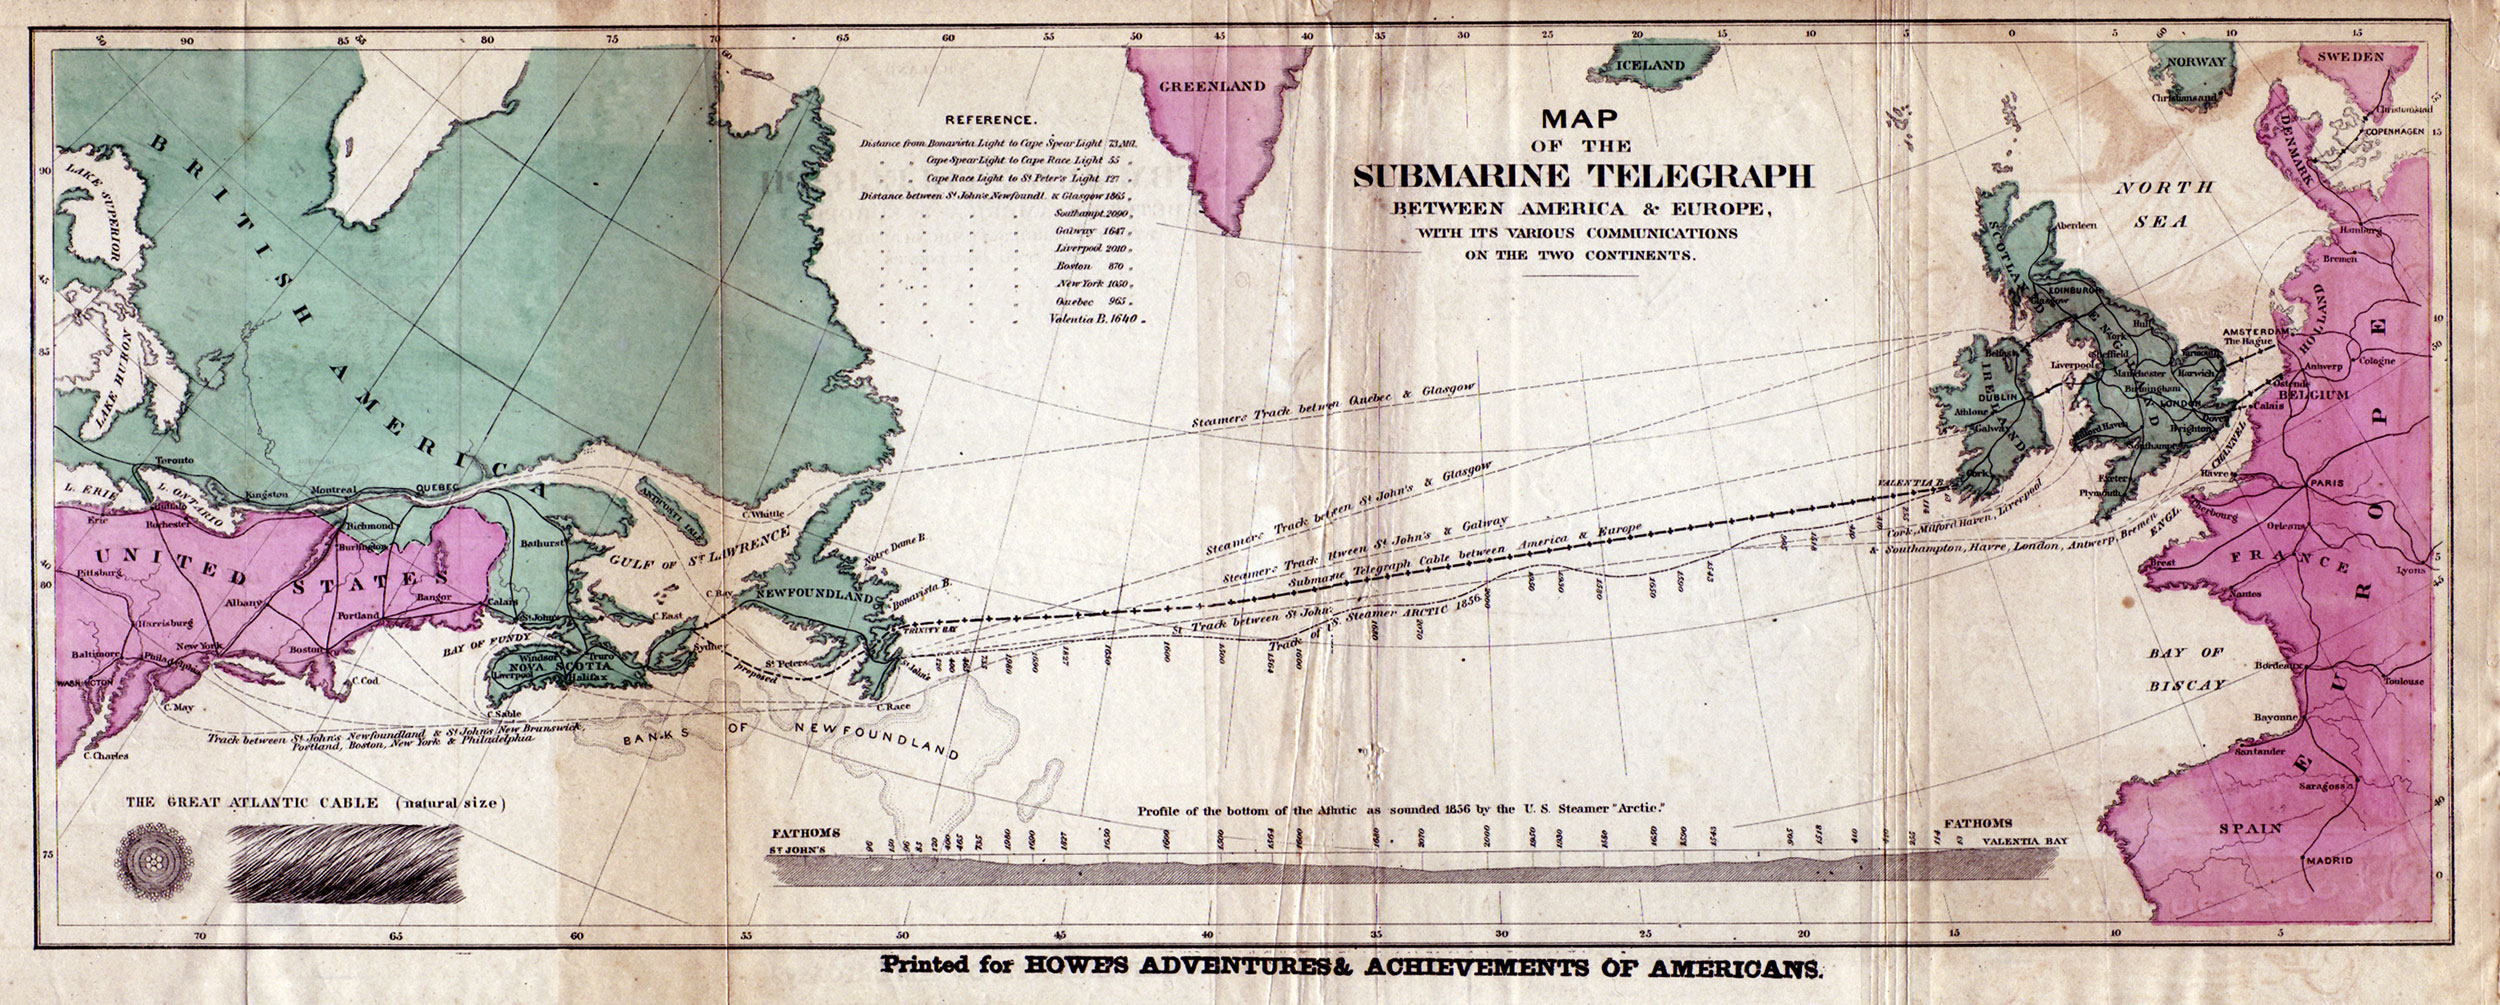 Photo of an early Atlantic cable map